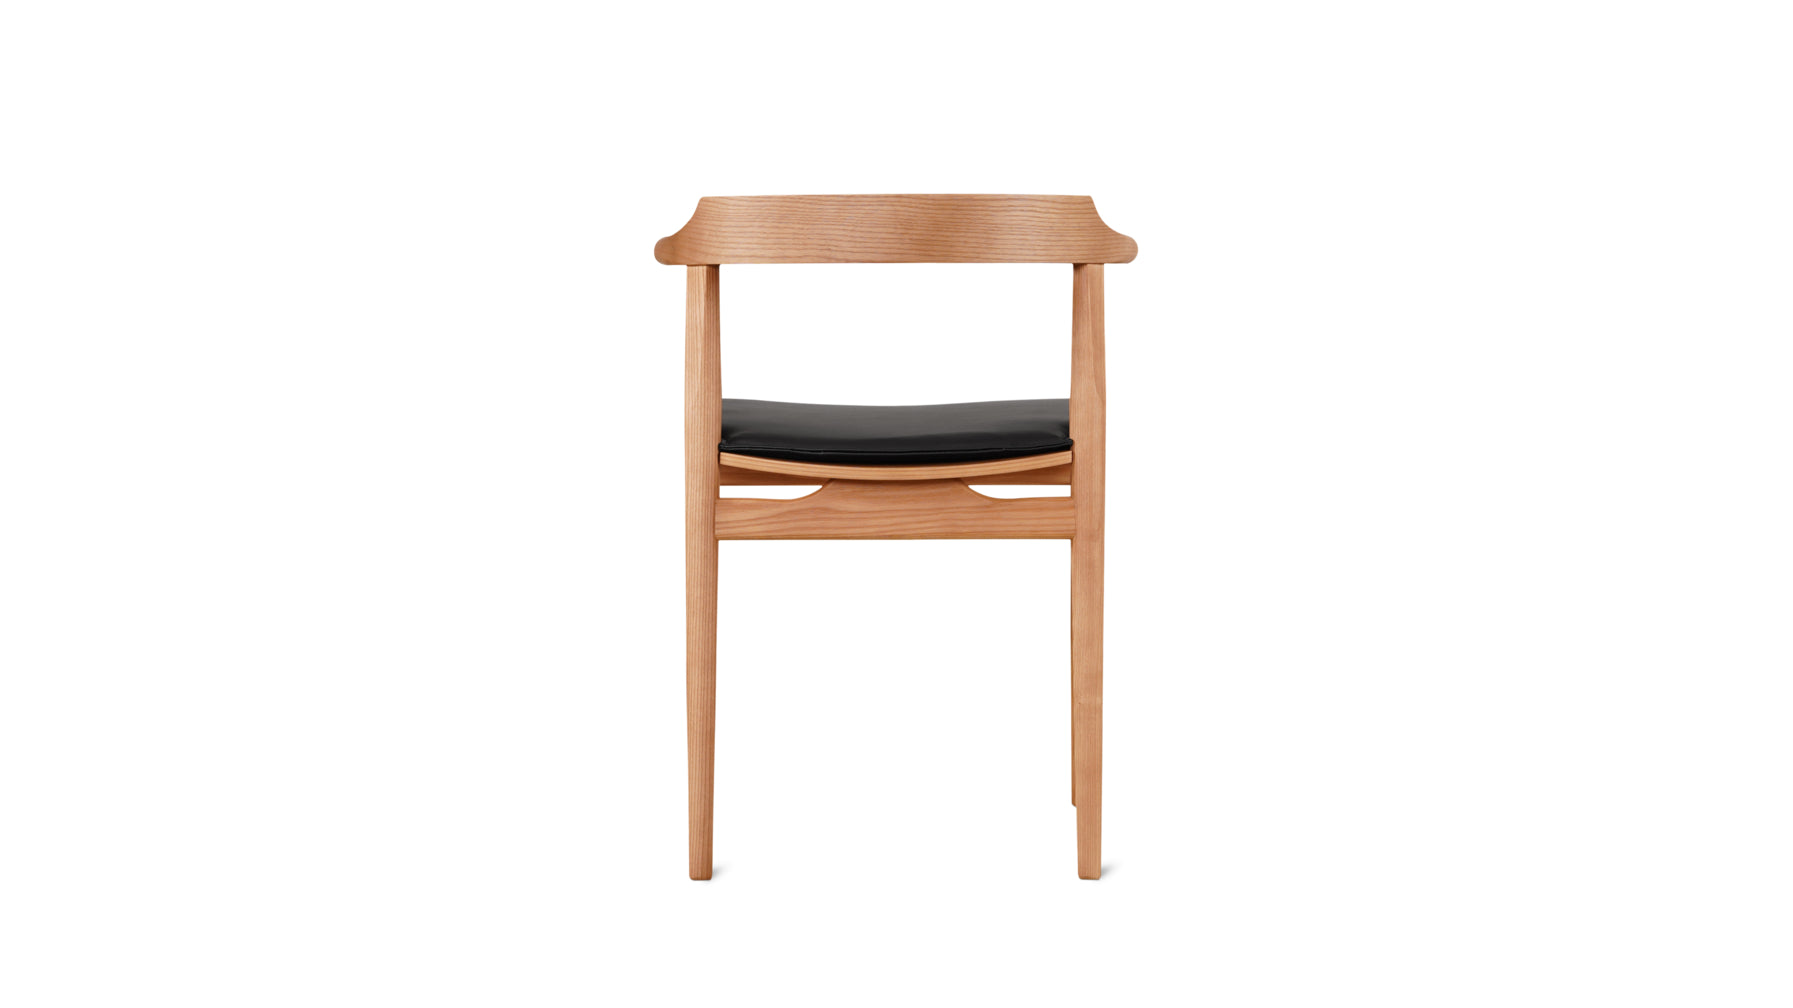 Tuck In Dining Chair with Cushion, White Oak, Wood Seat with Black Cushion - Image 5